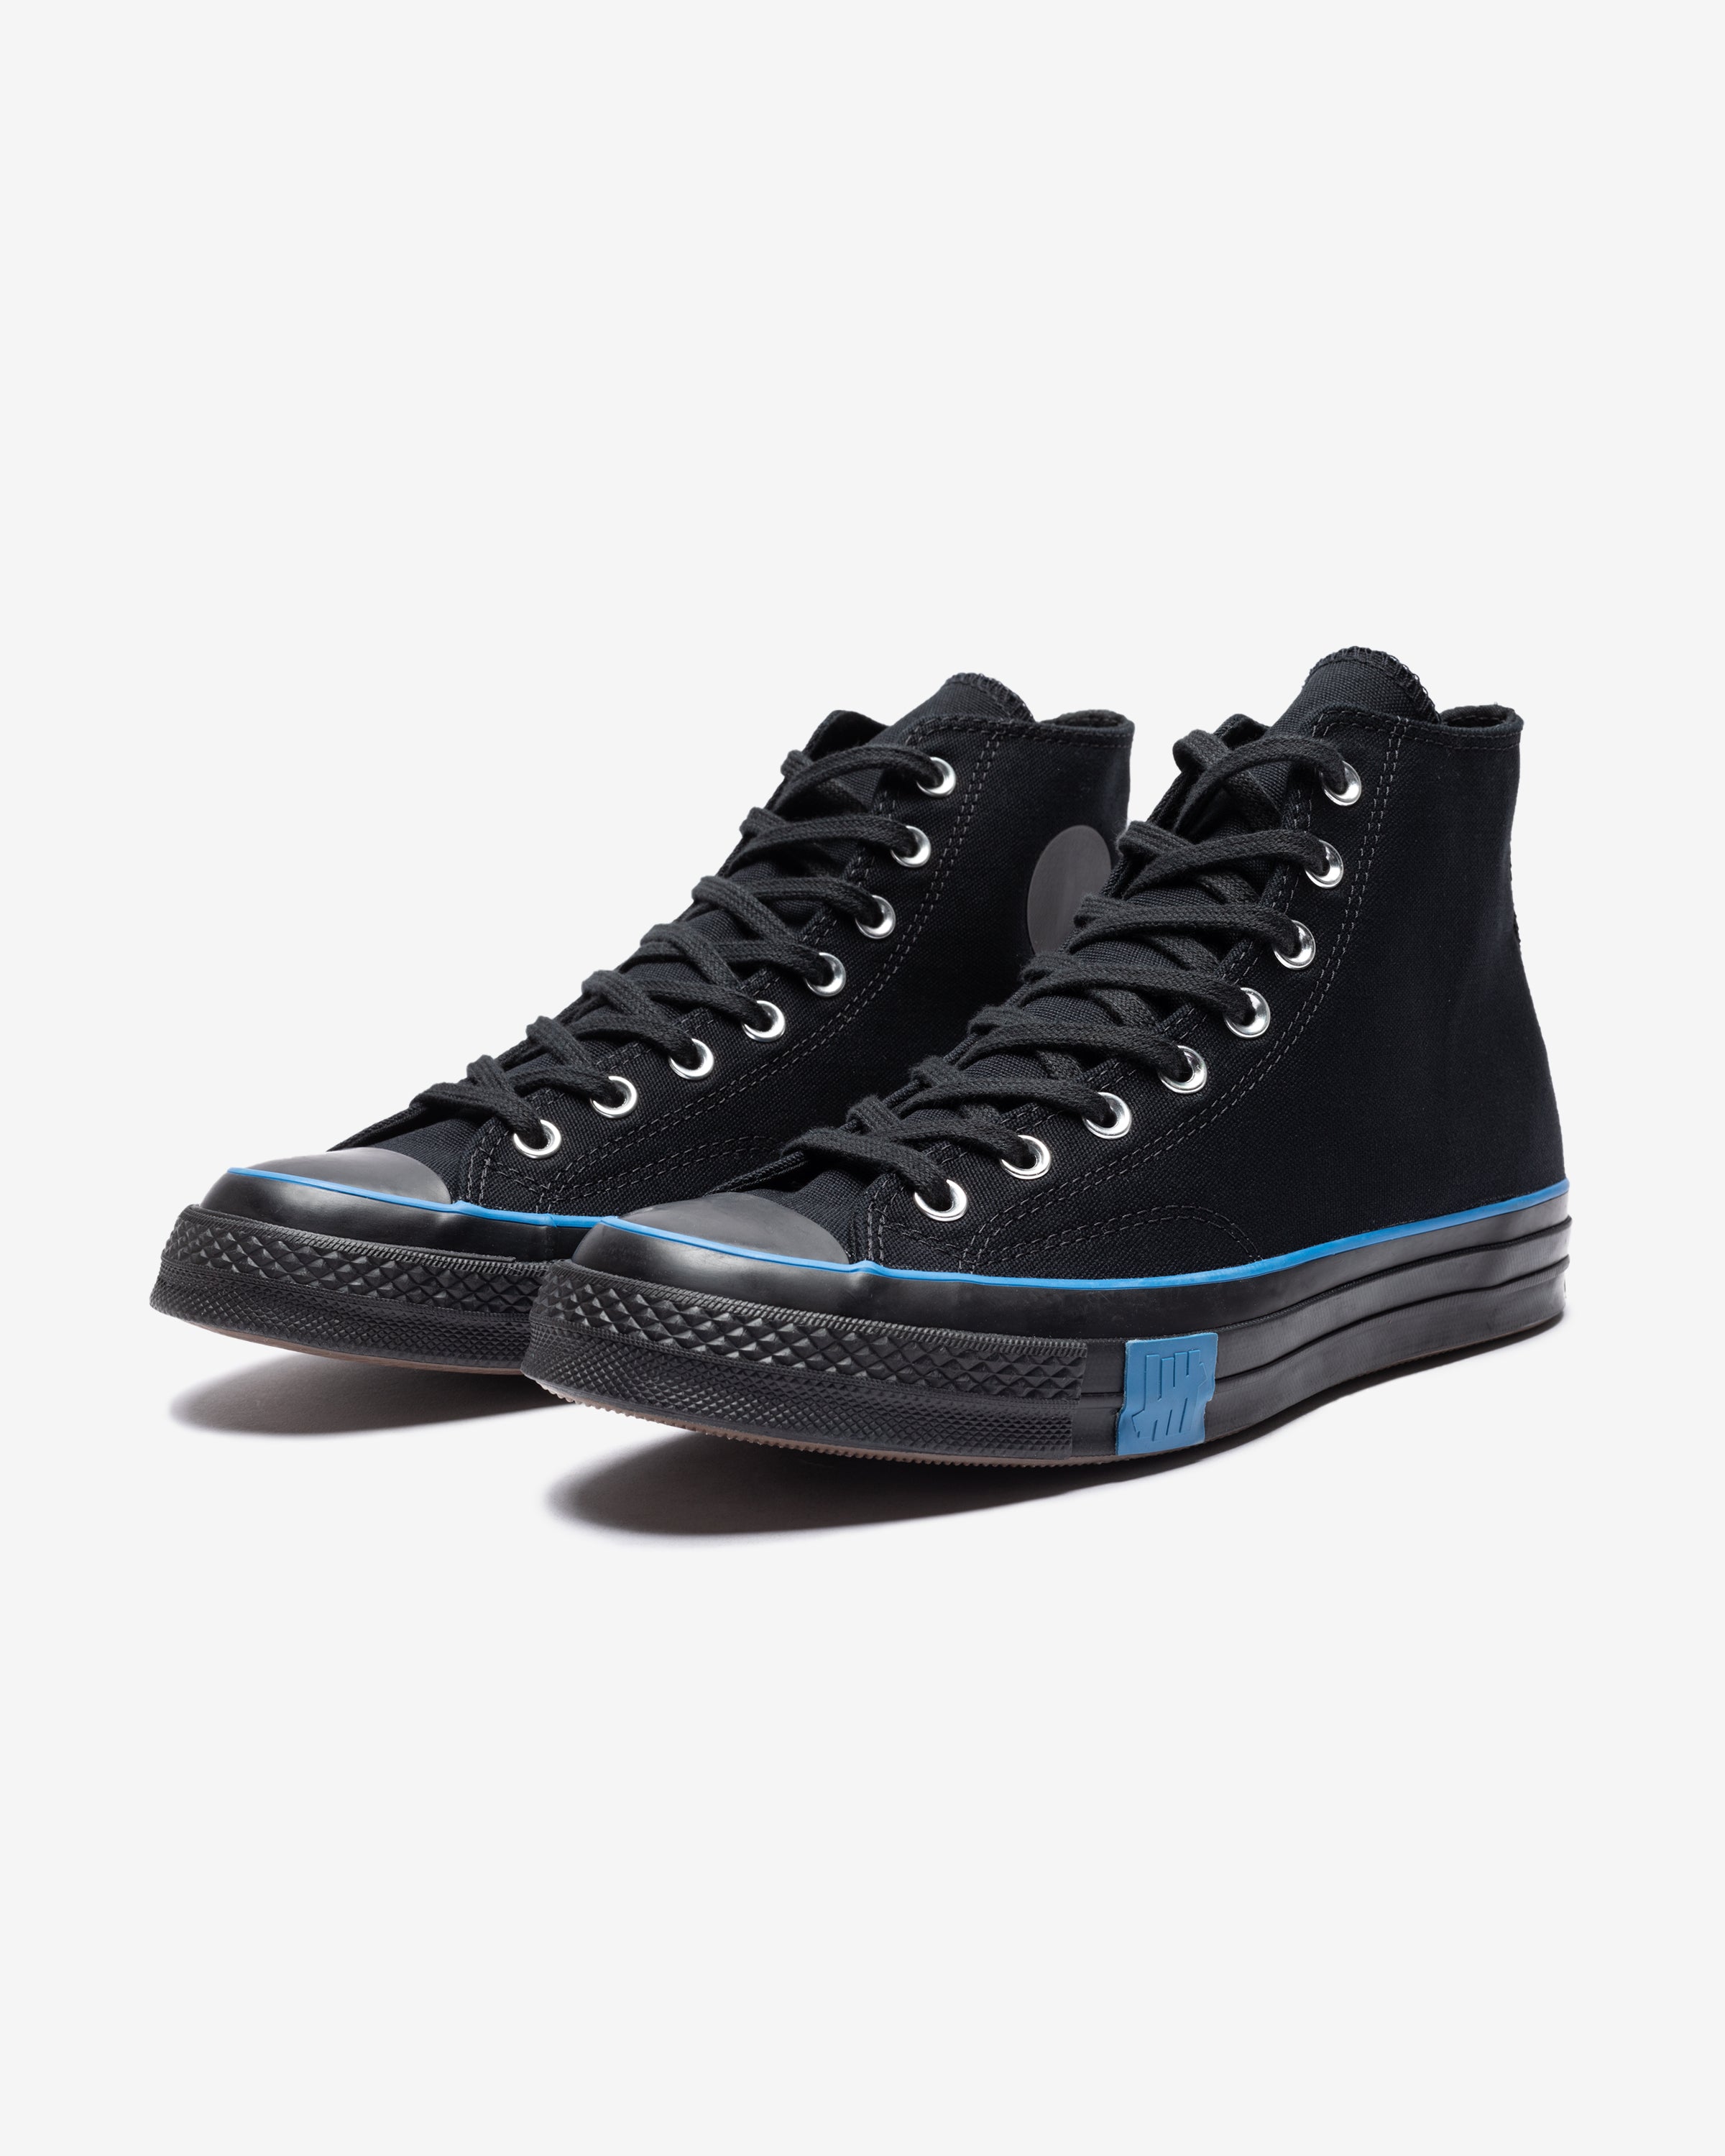 Converse X Undefeated Chuck 70 Hi Black Imperialblue Undefeated 